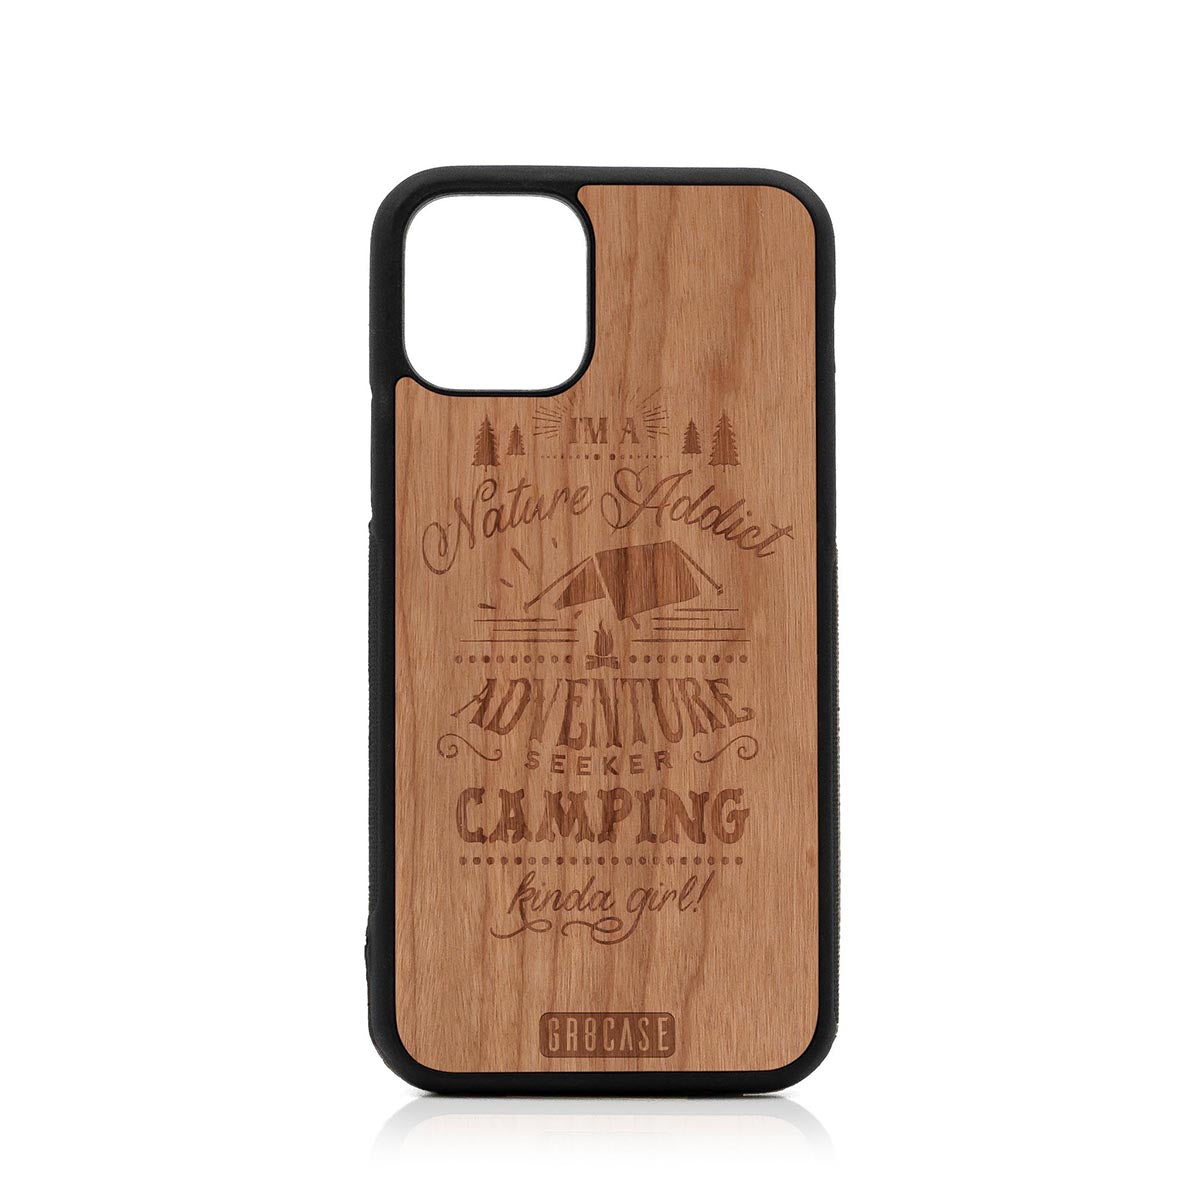 I'm A Nature Addict Adventure Seeker Camping Kinda Girl Design Wood Case For iPhone 11 Pro by GR8CASE